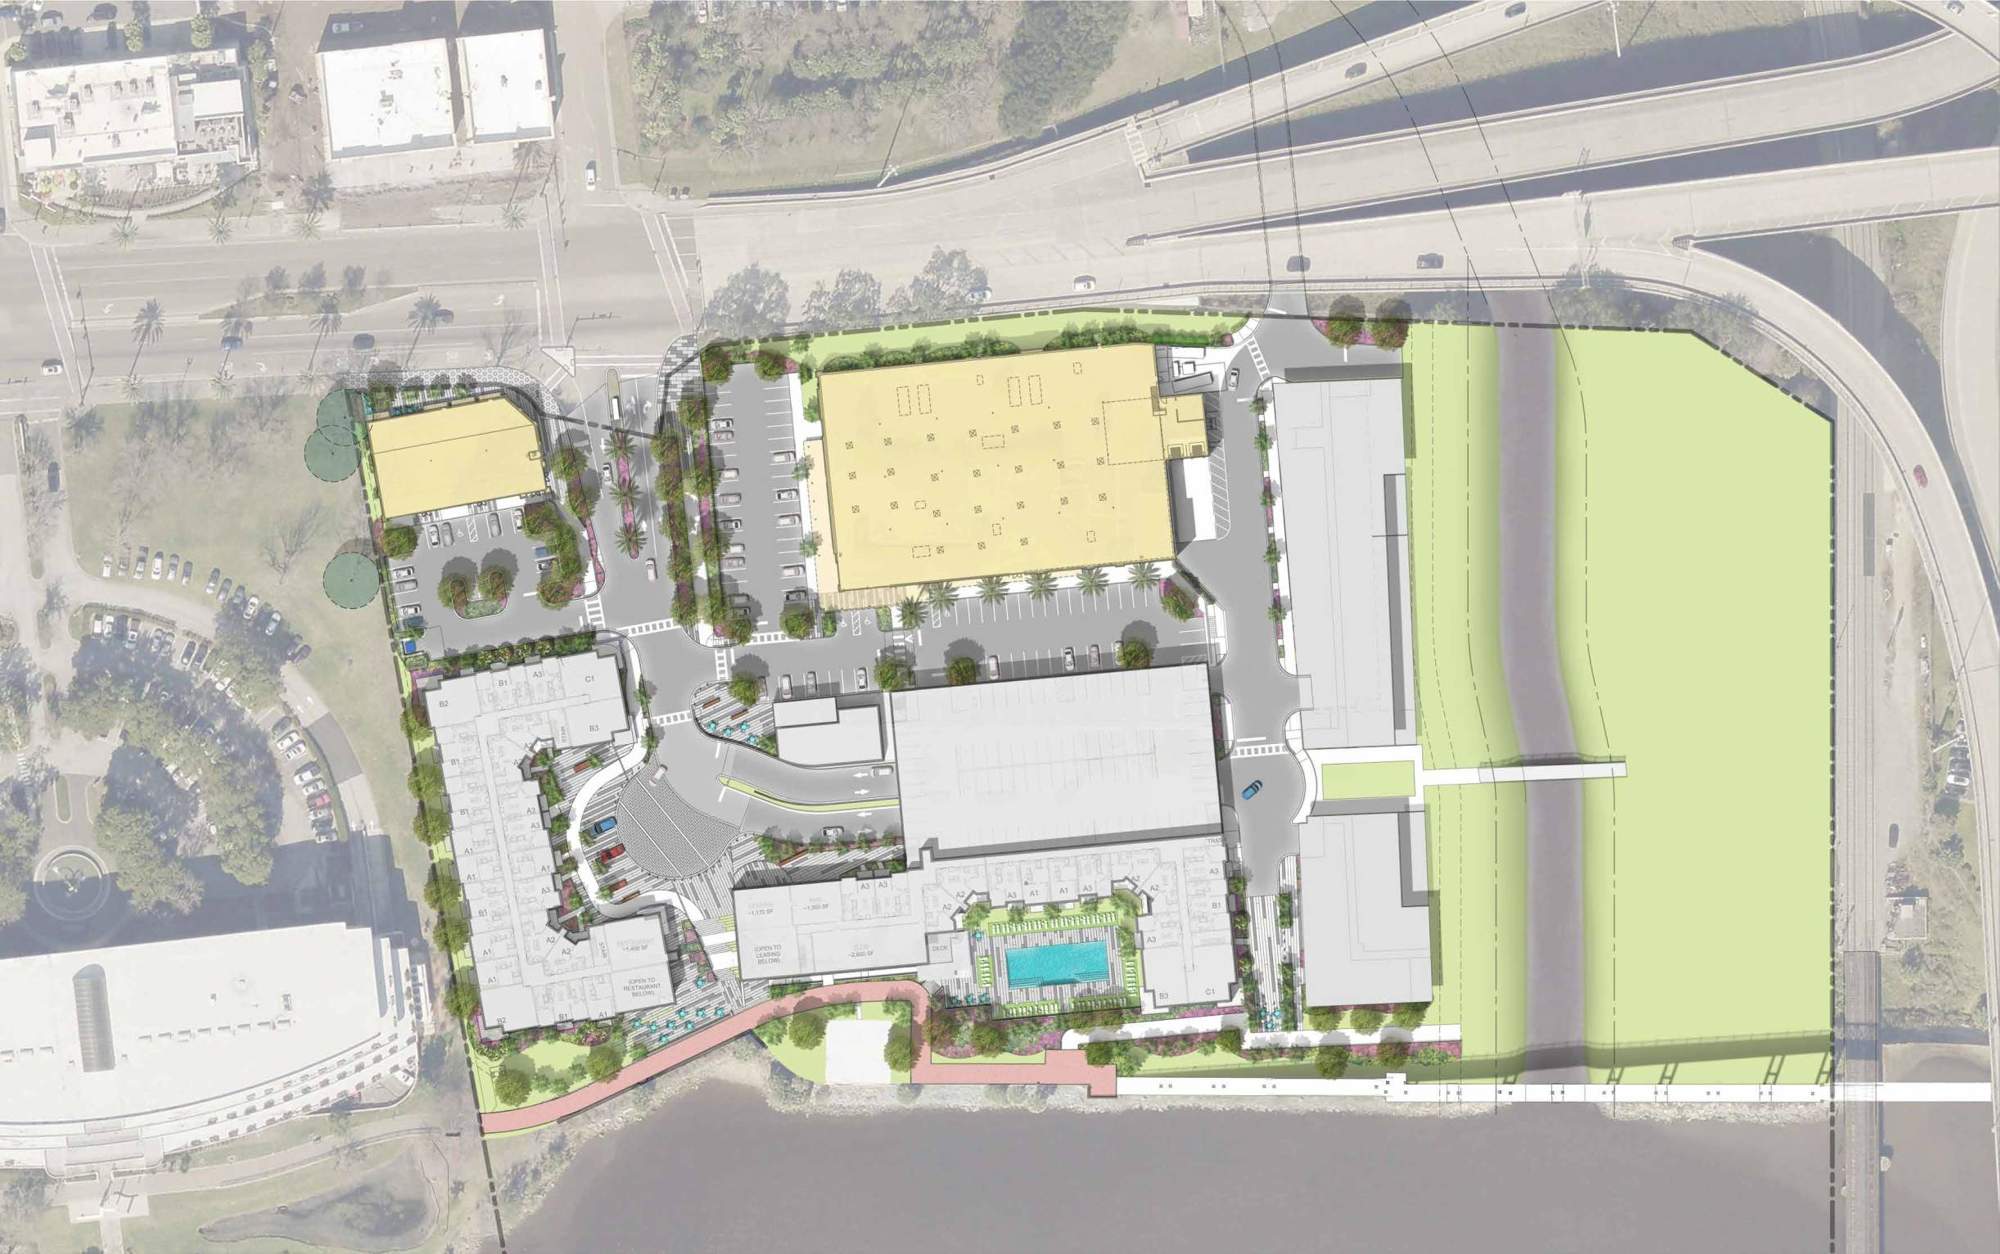 The site plan for One Riverside. Access to the mixed-use development is from Riverside Avenue.